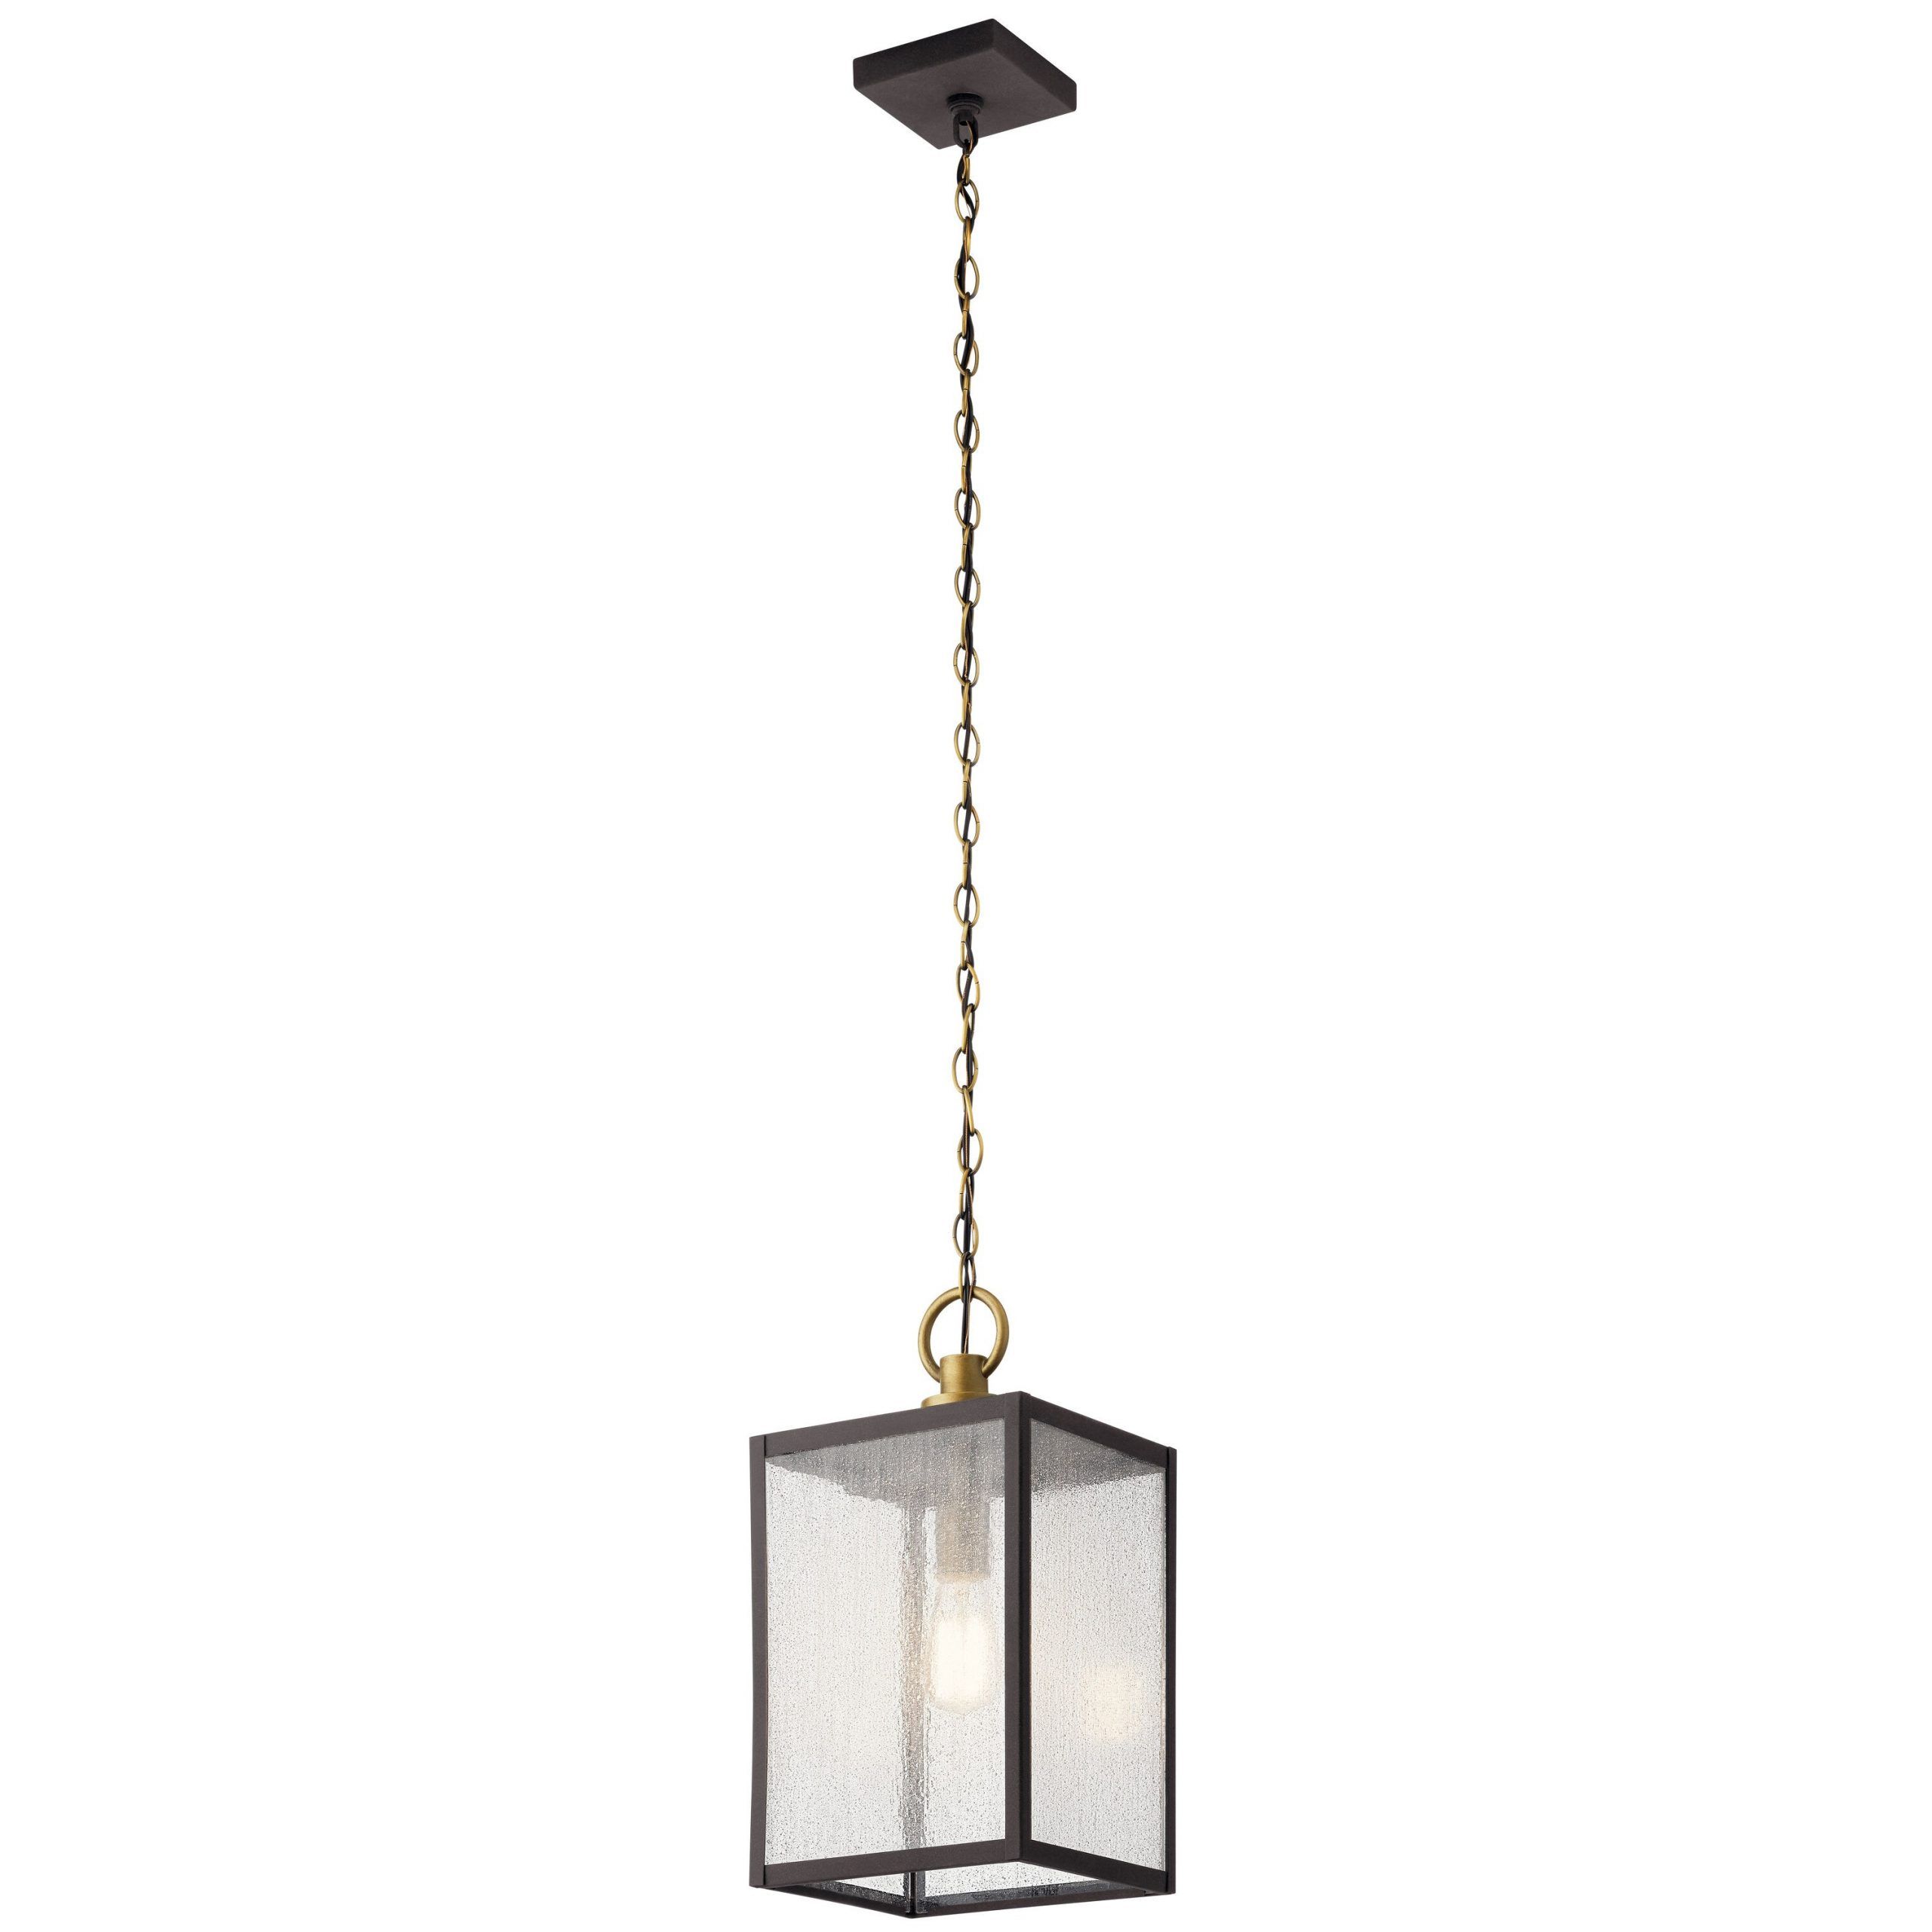 Most Popular Weathered Zinc Lantern Chandeliers With Regard To Kichler Lahden Weathered Zinc Farmhouse Textured Glass Square Outdoor  Pendant Light In The Pendant Lighting Department At Lowes (View 1 of 10)